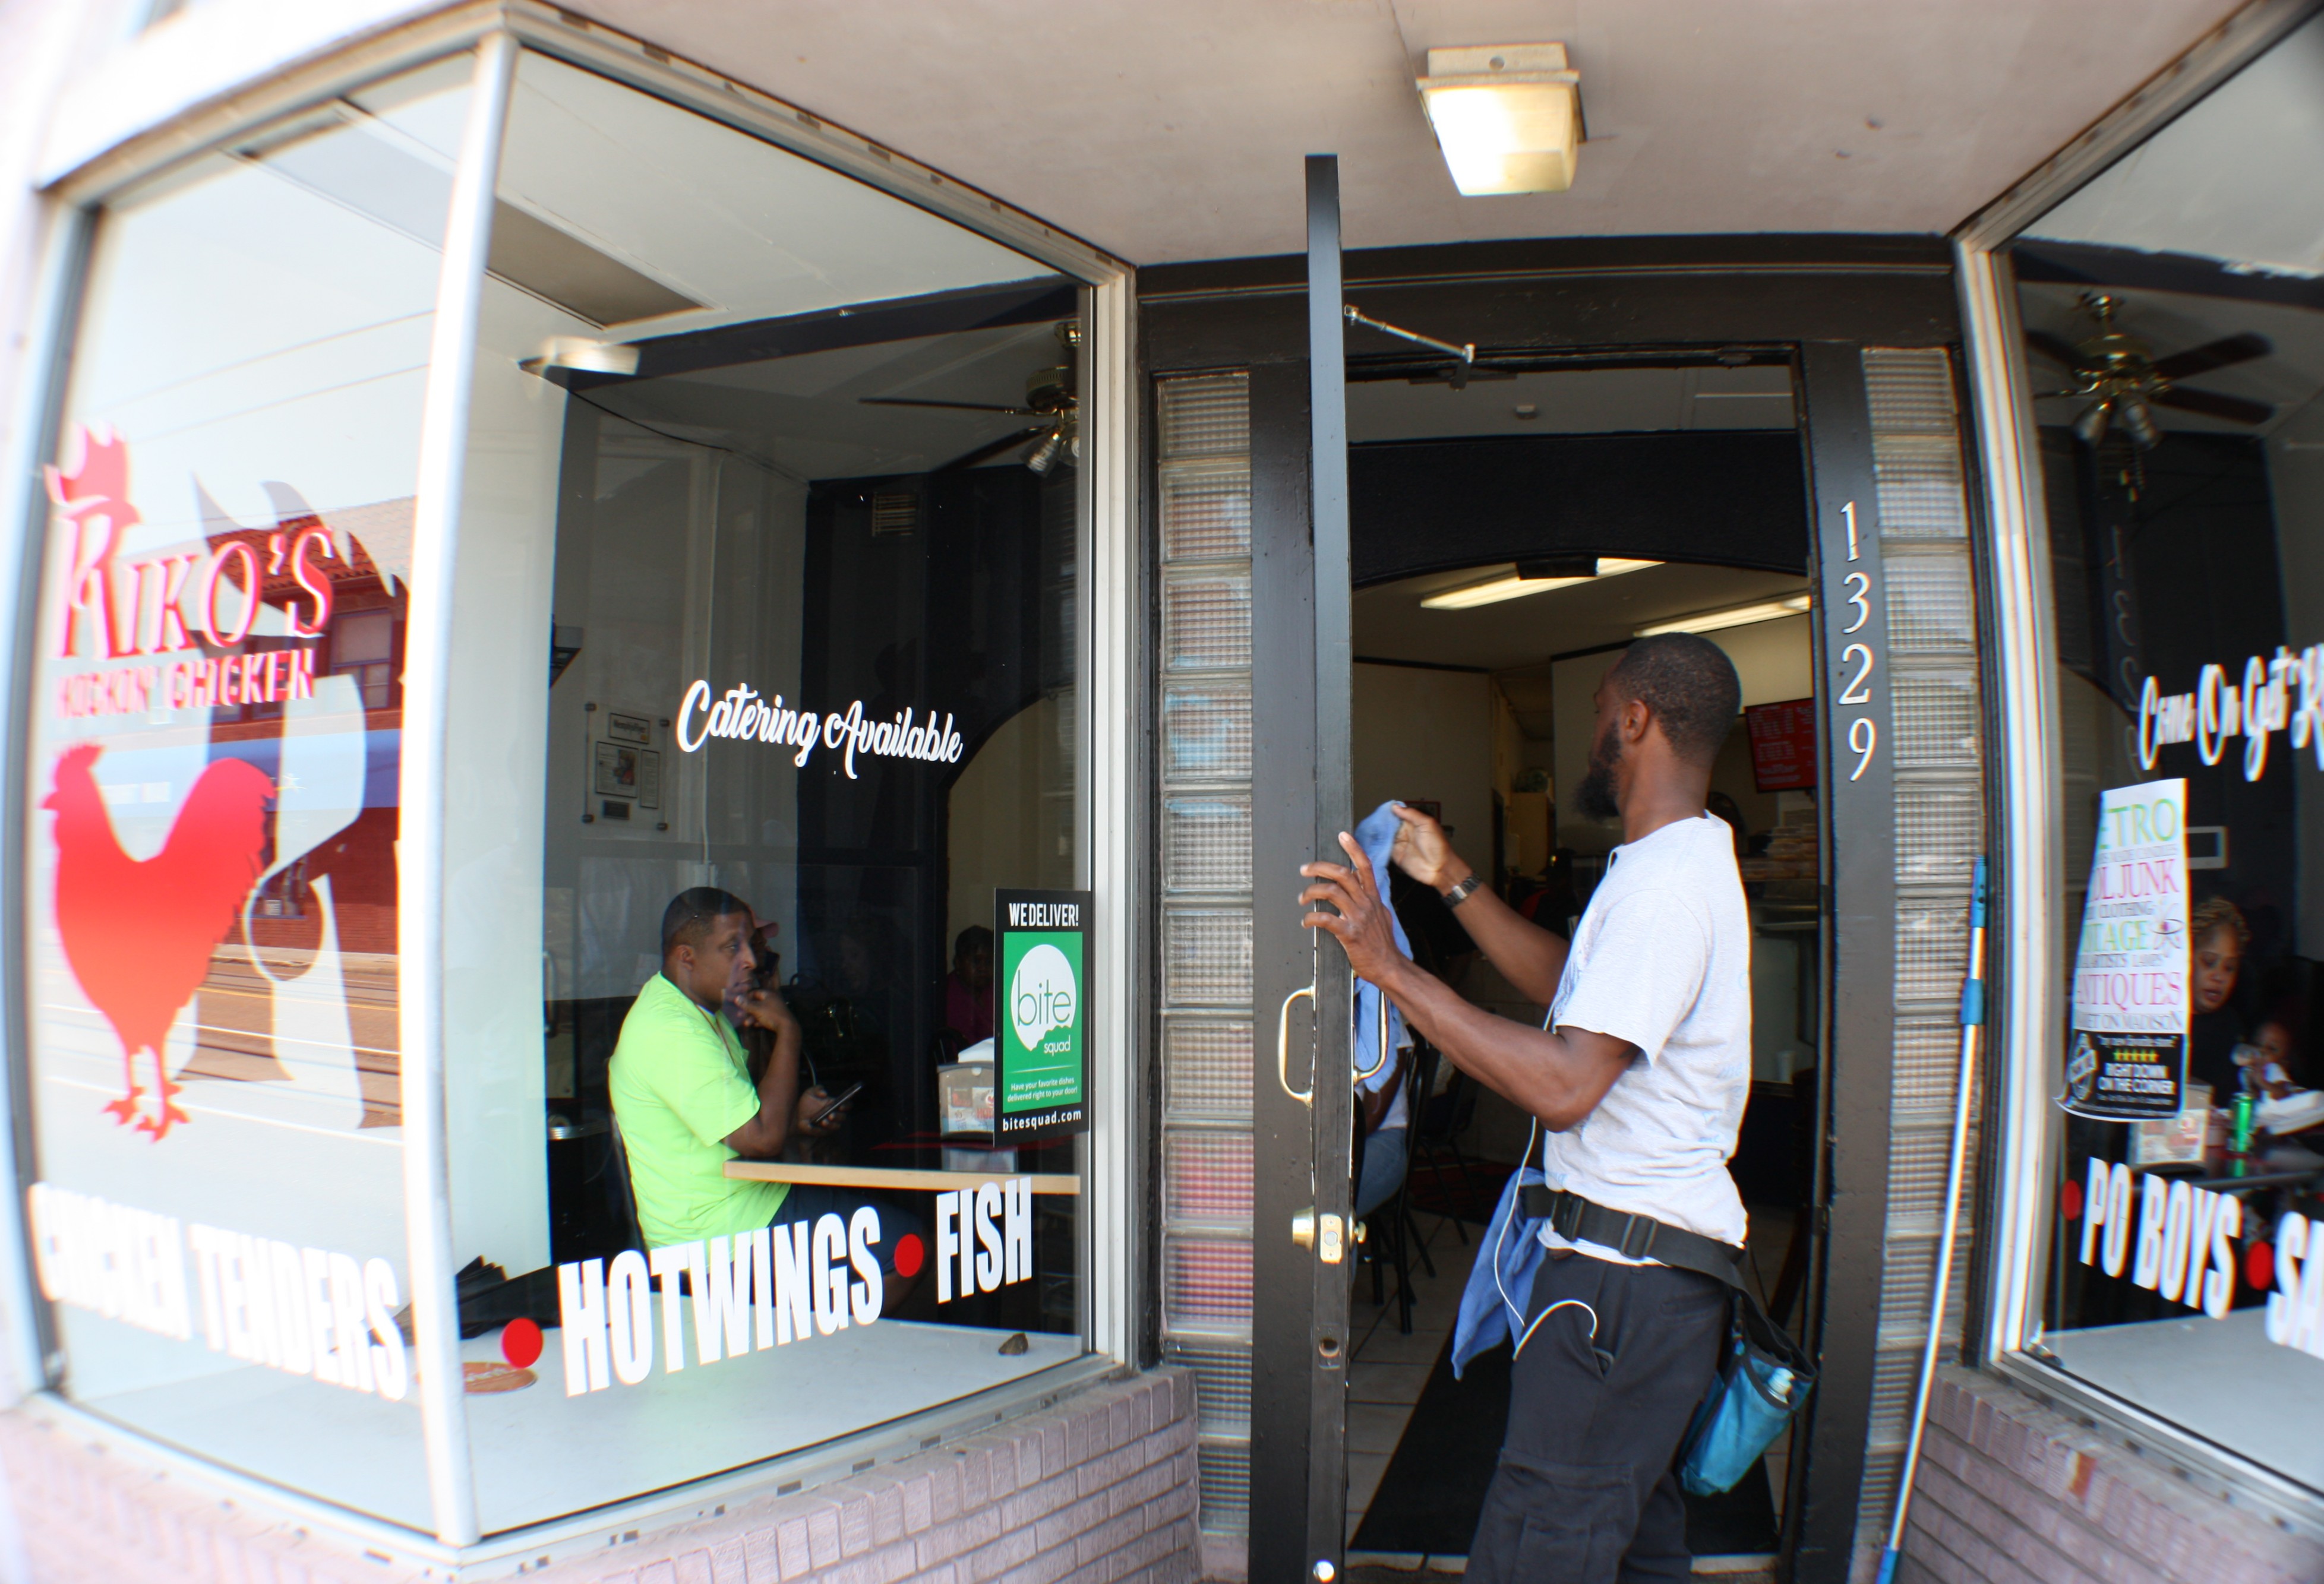 Walter Clark, owner of Outstanding Touch window services, puts the finishing touches on the door of Riko's Kickin Chicken, located at 1329 Madison Avenue. (Cole Bradley)